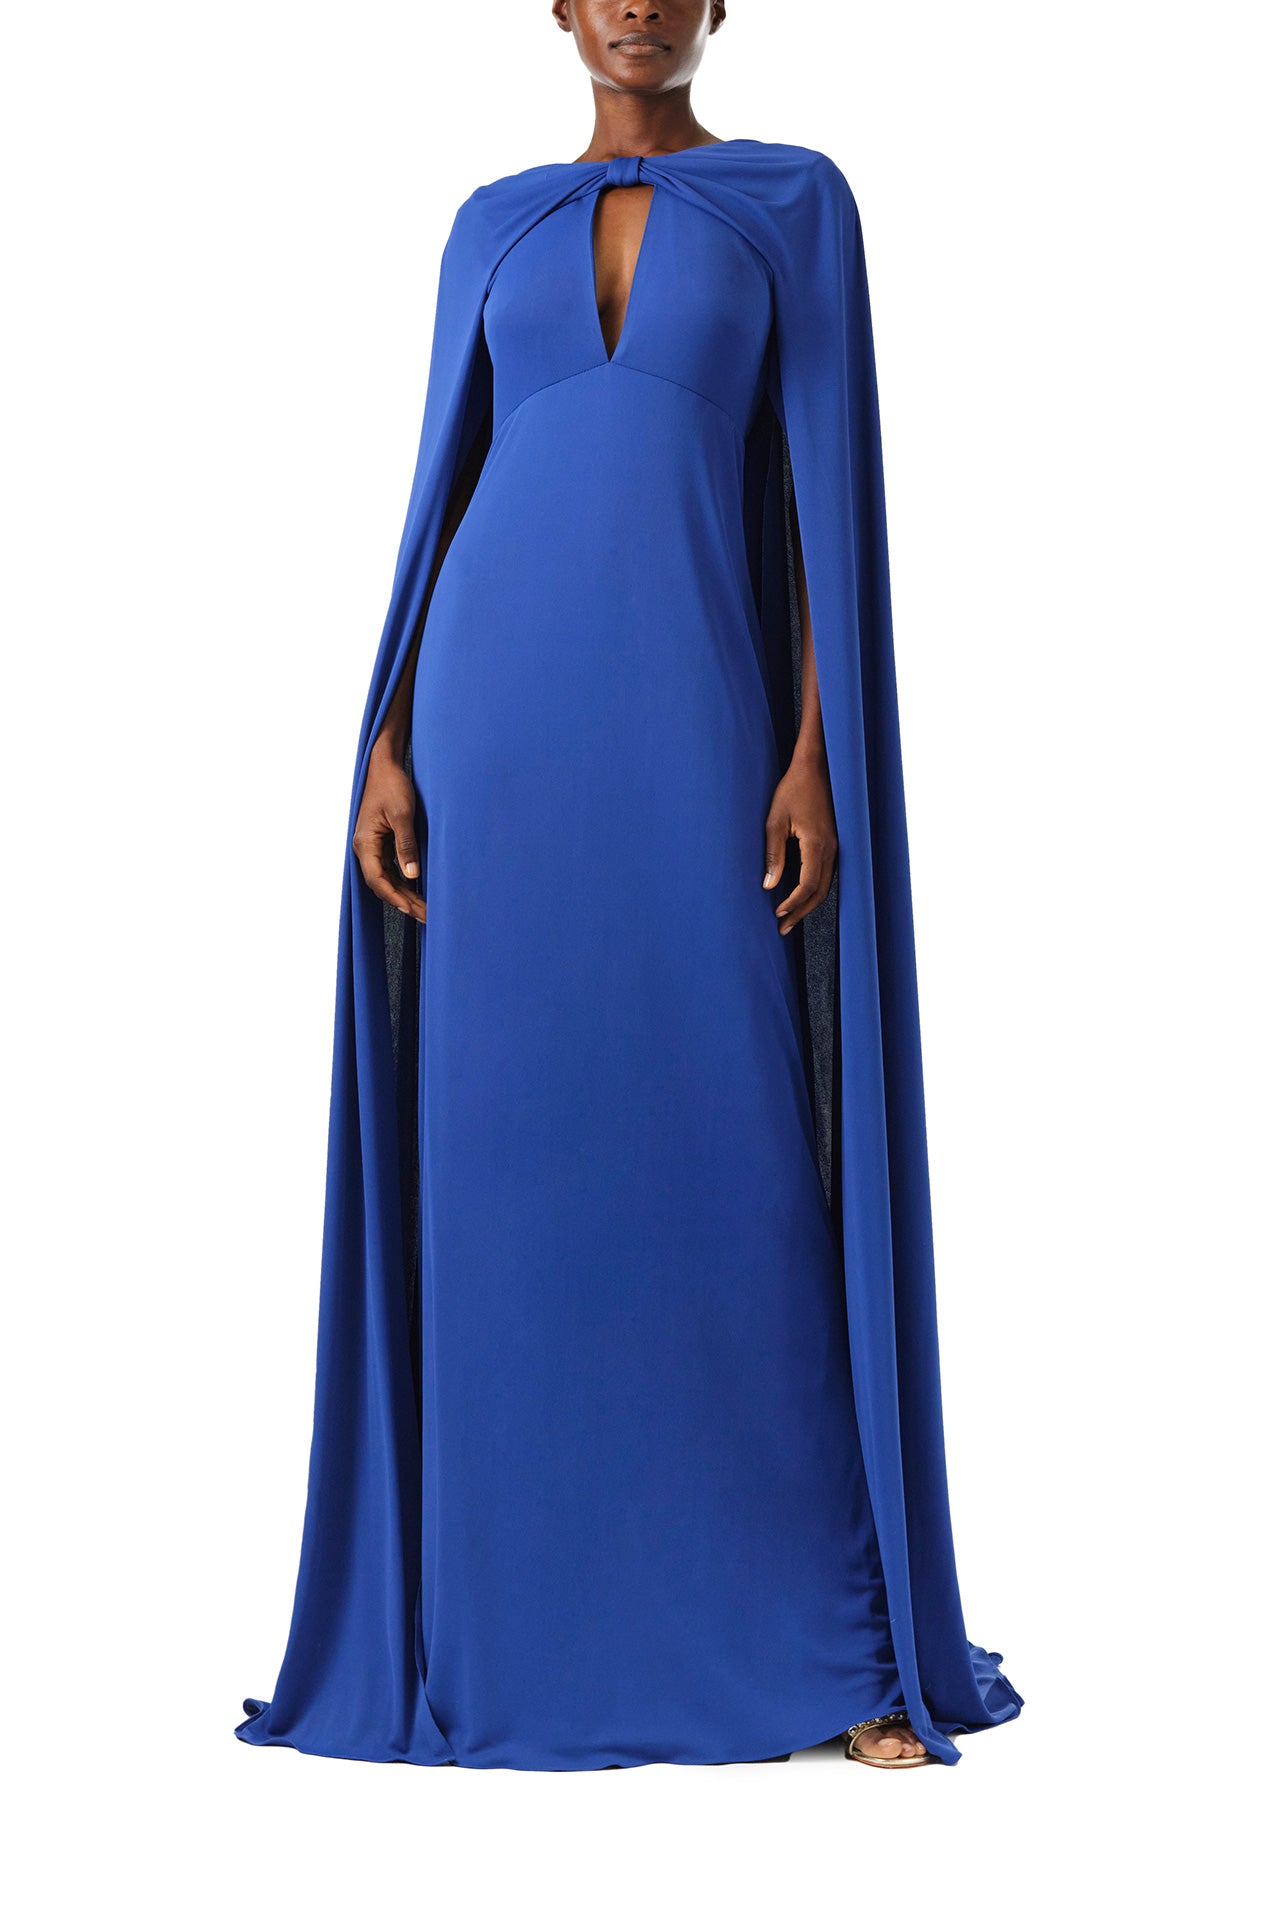 Monique Lhuillier Spring 2024 royal blue crepe-back satin gown with attached cape and keyhole bodice - front two.